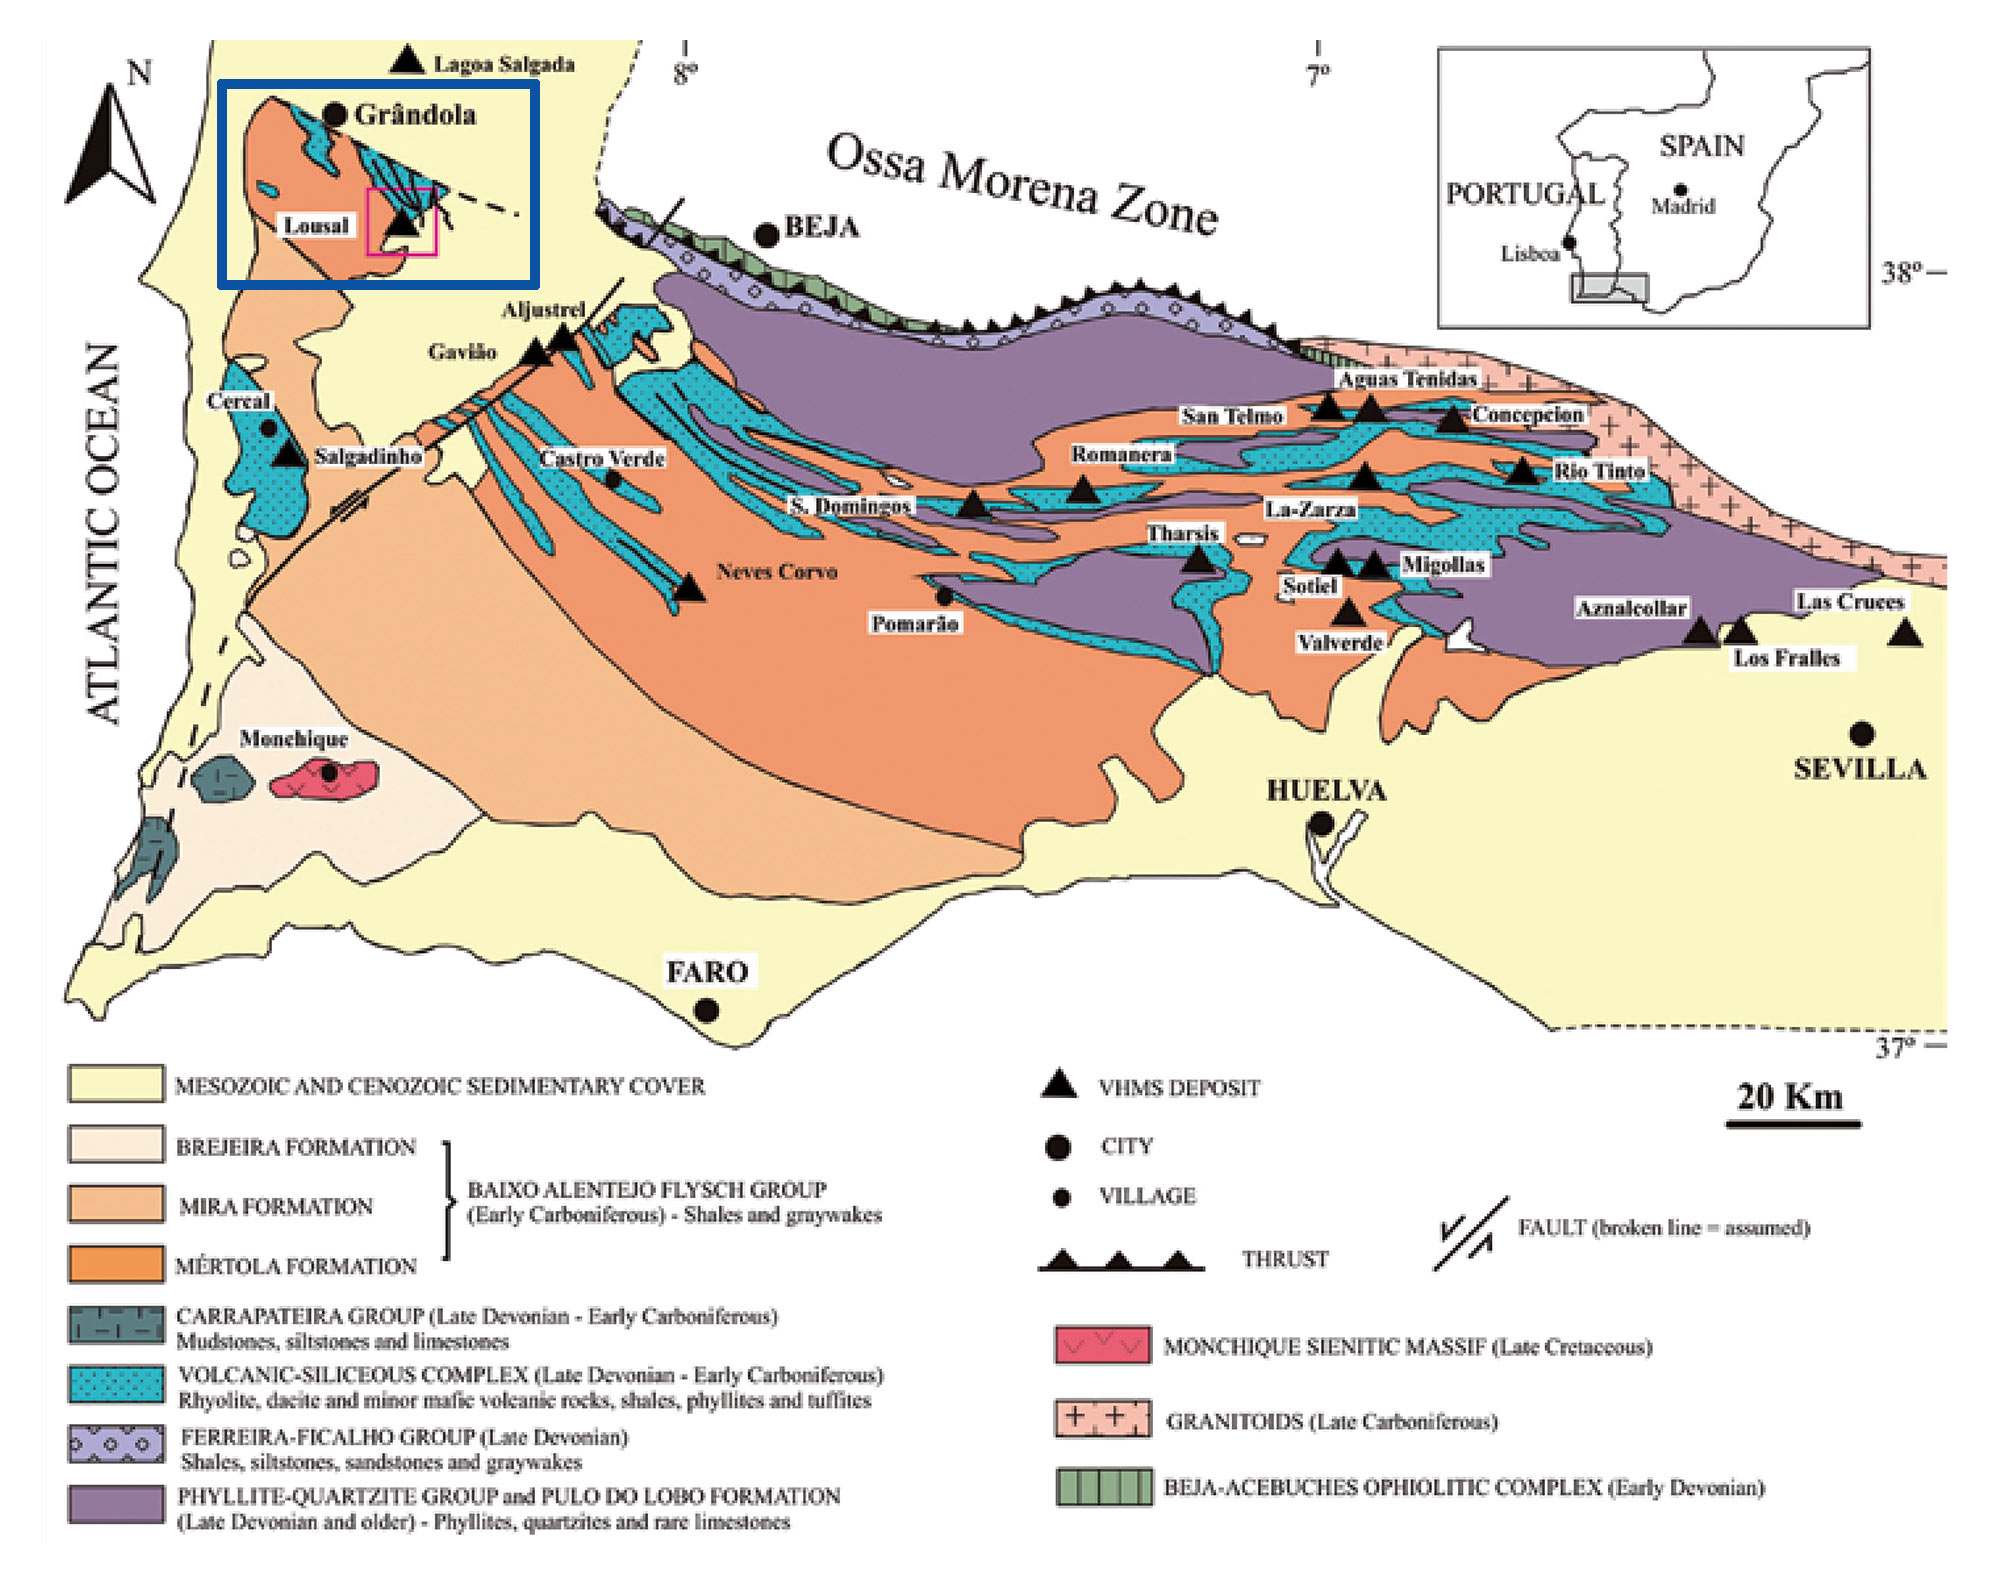 General geology of the Iberian pyrite belt and location of the Lousal deposit and other massive sulfide deposits (modified after Carvalho et al., 1999 and Huston et al., 2011).